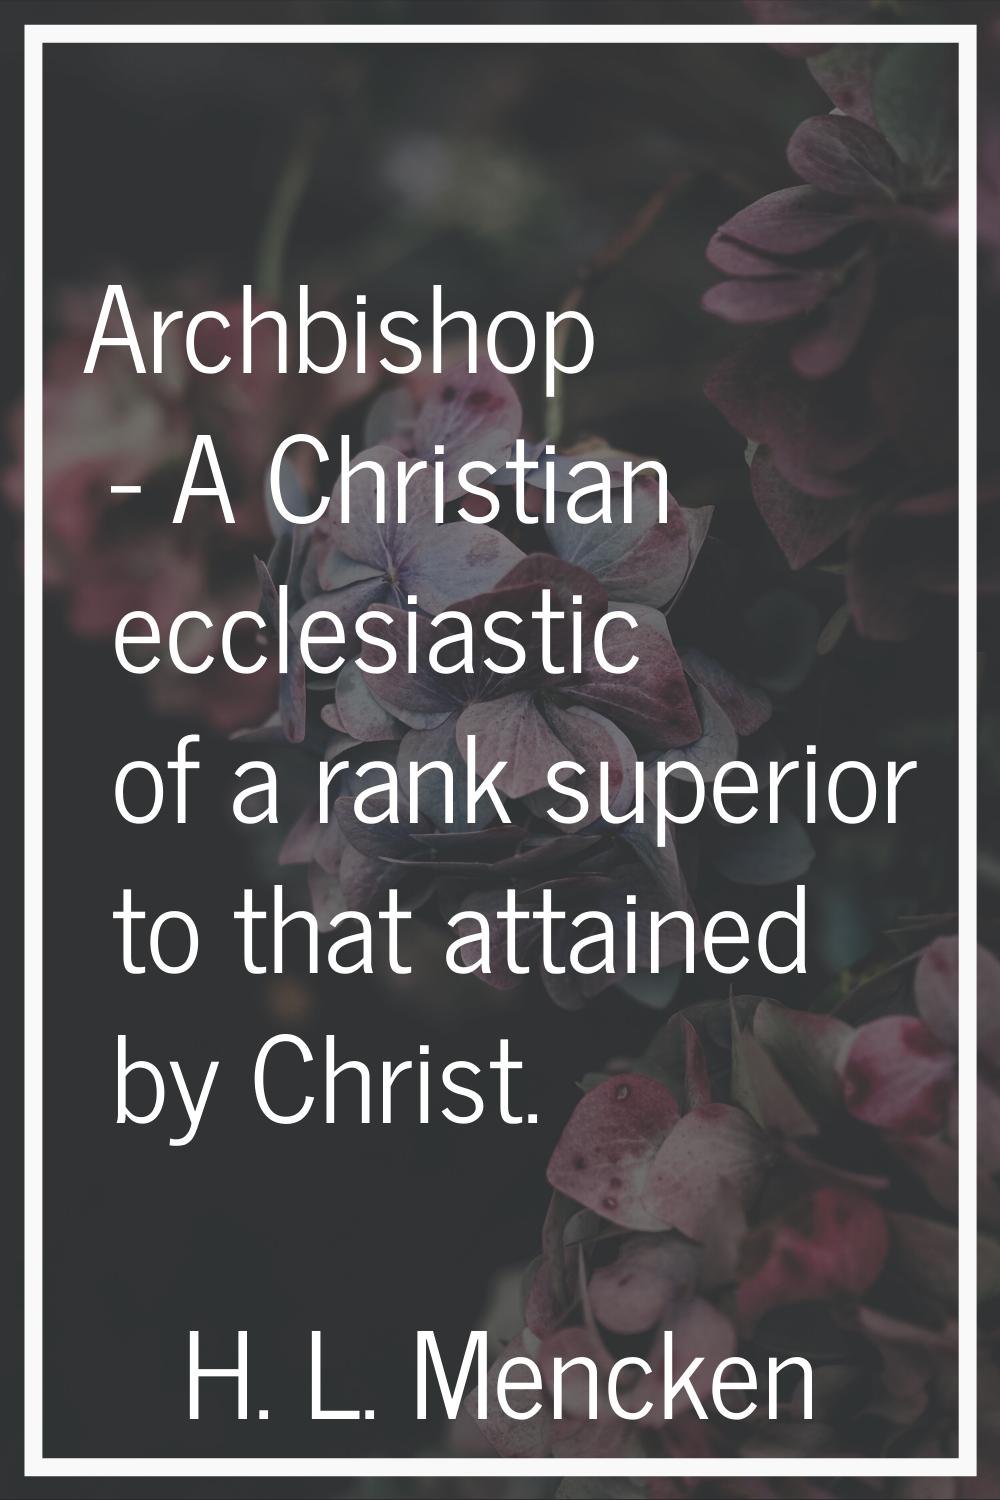 Archbishop - A Christian ecclesiastic of a rank superior to that attained by Christ.